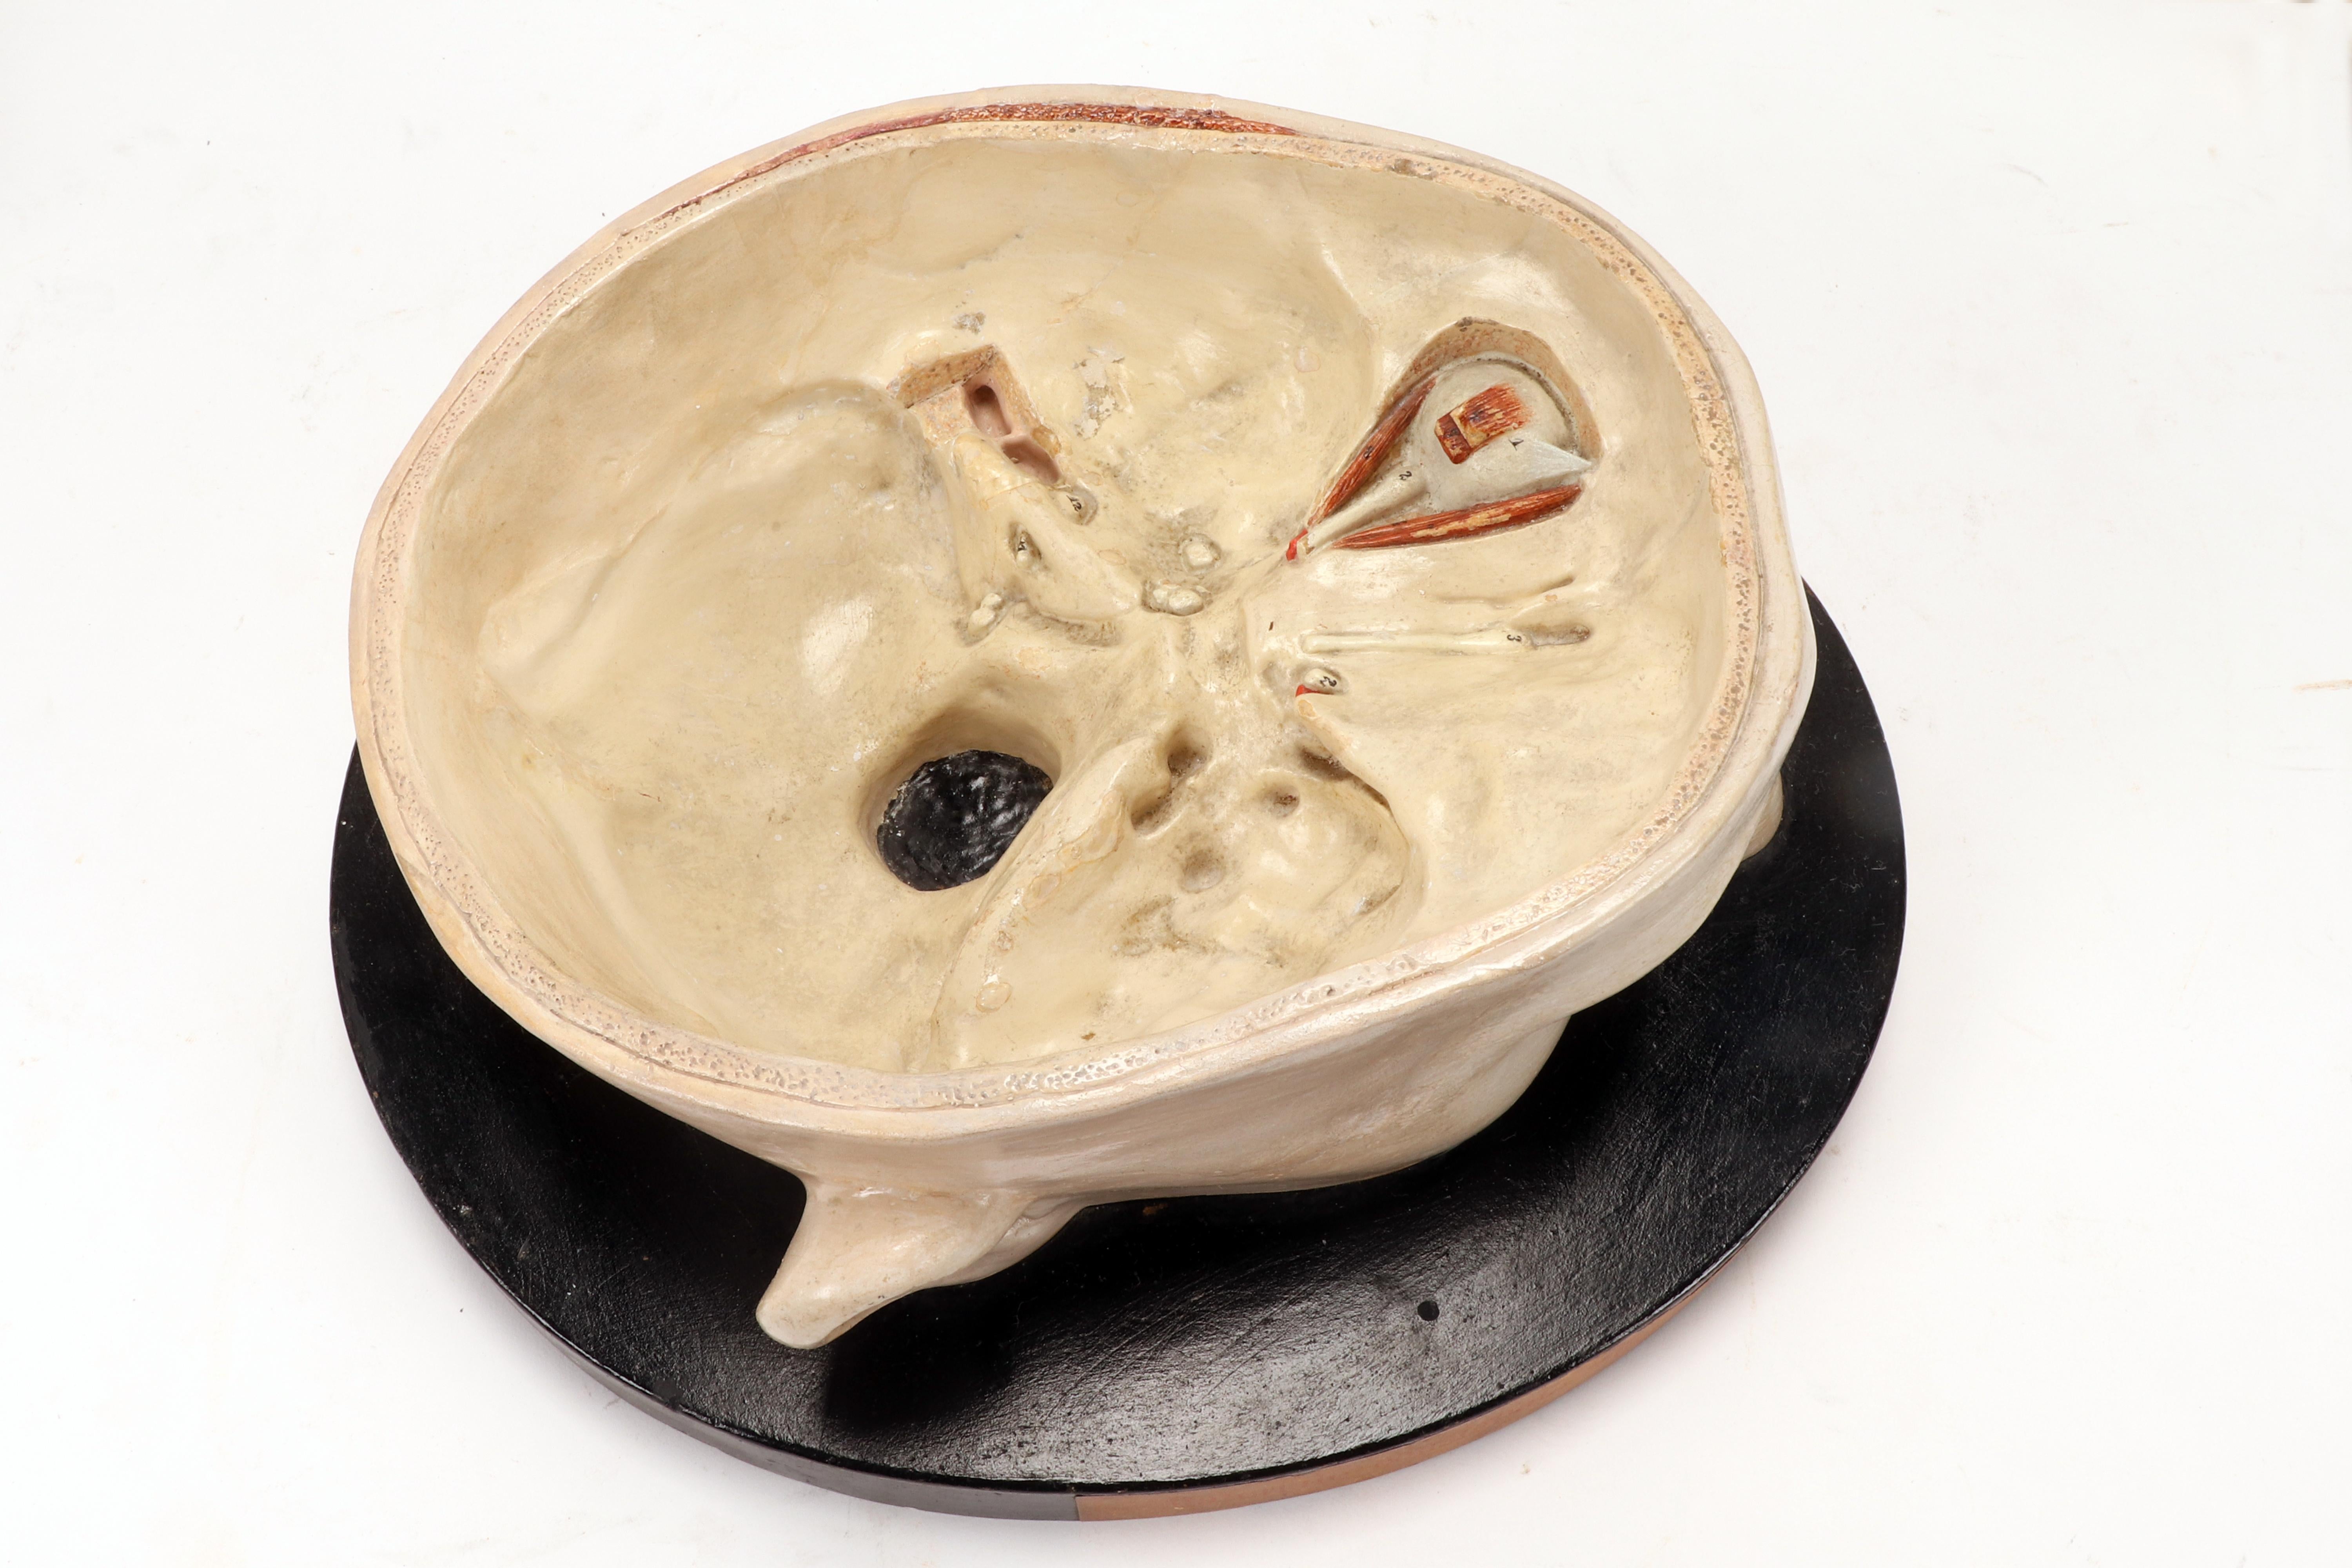 Anatomical model: a brain inserted into a sectioned skullcap, Italy 1920. 3